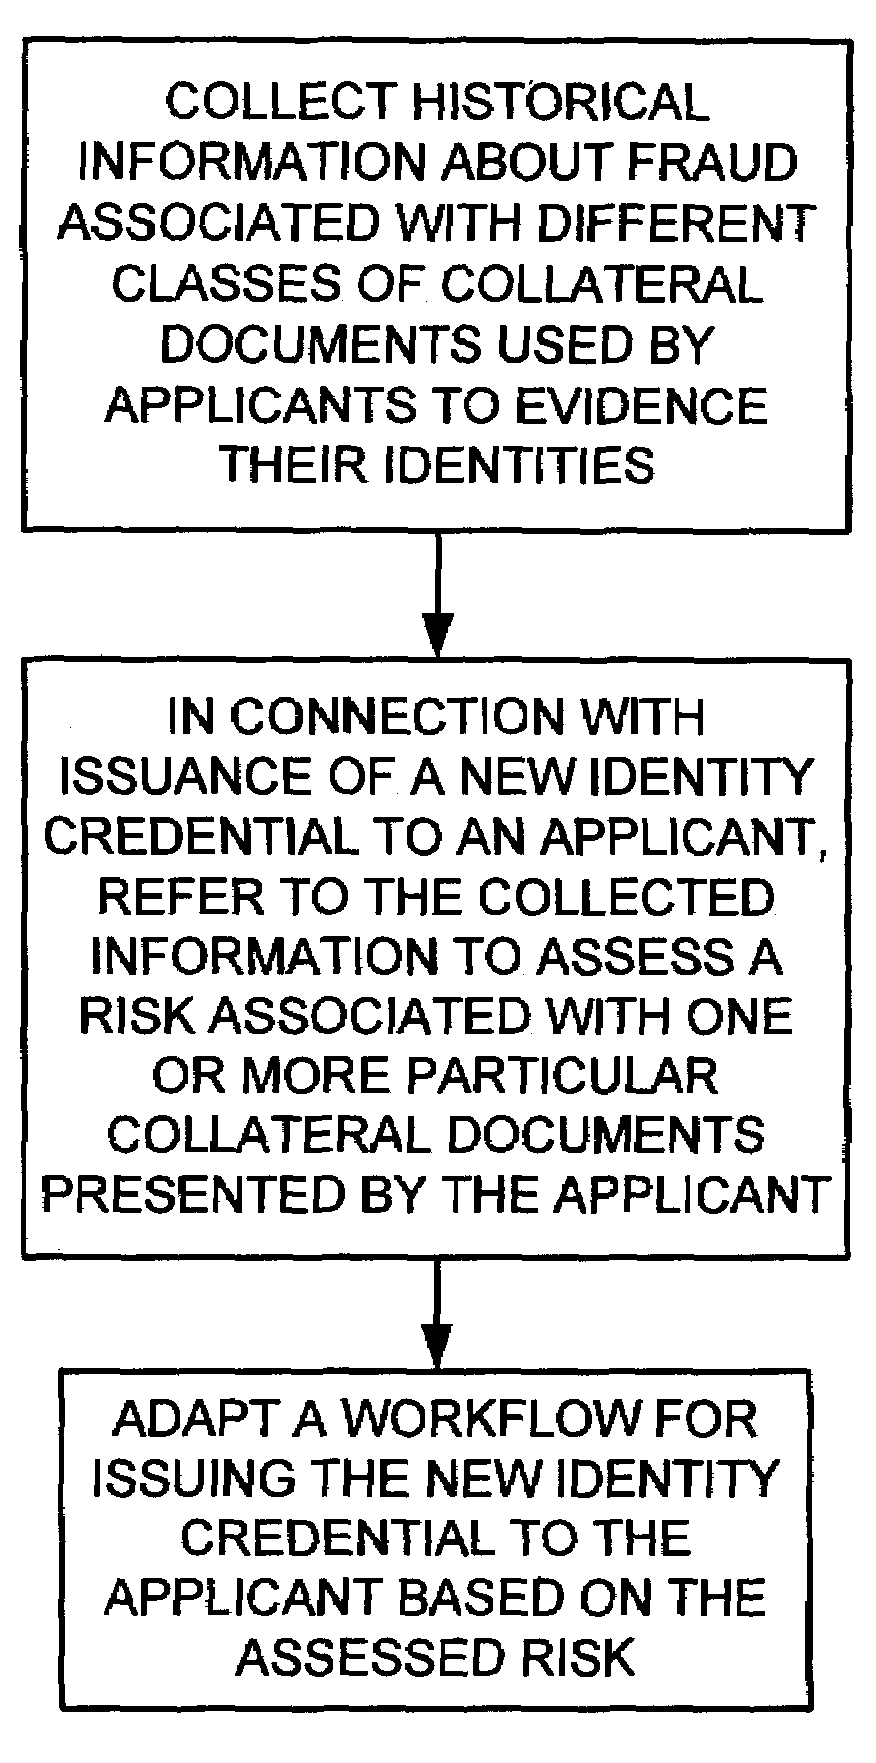 Fraud deterrence in connection with identity documents